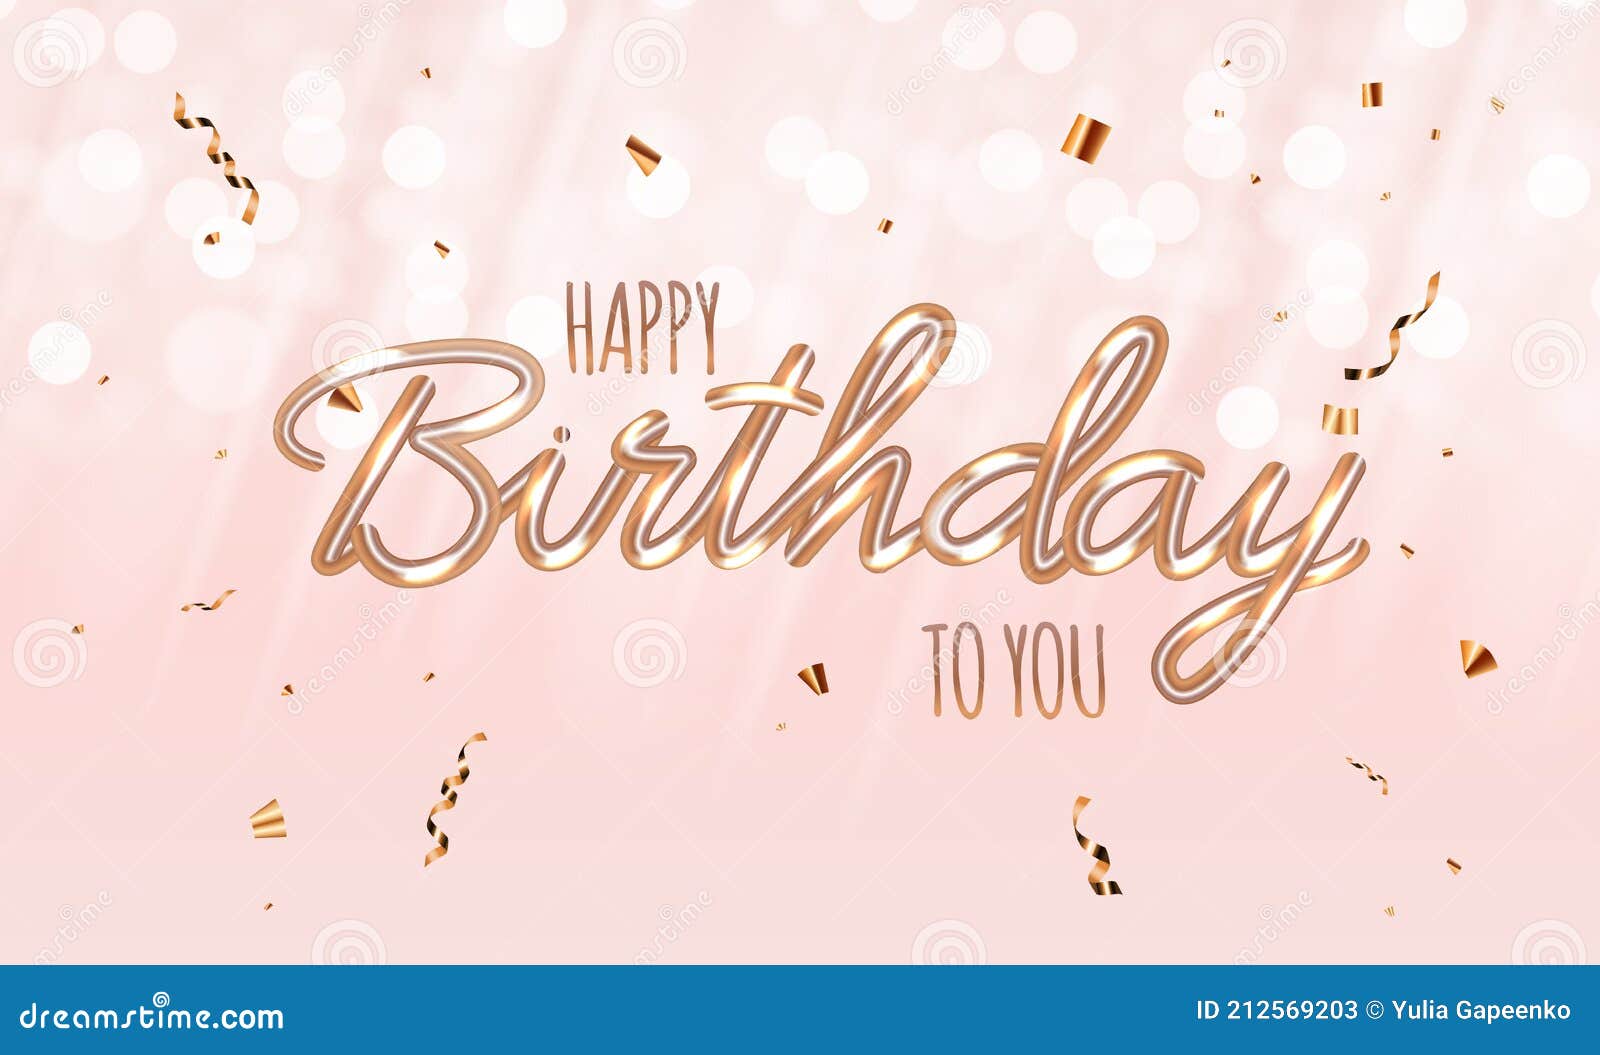 Happy Birthday Pink Glossy Background with Confetti. Vector ...